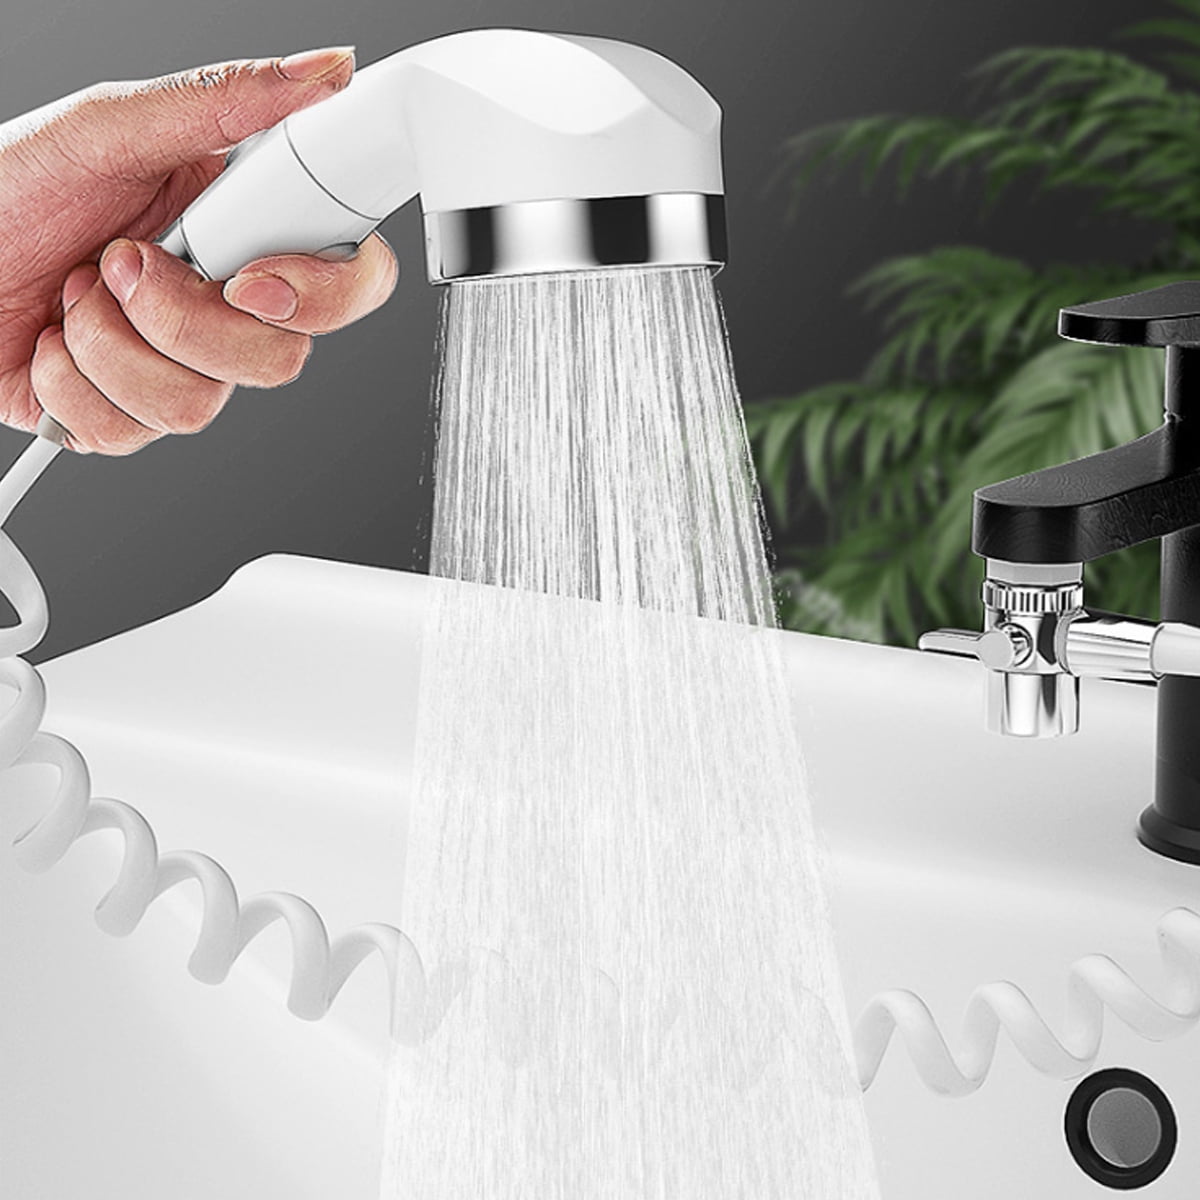 Multi-Functional Tap Shower Head Faucet Spray Hose For Bath Tub Kitchen Sink 